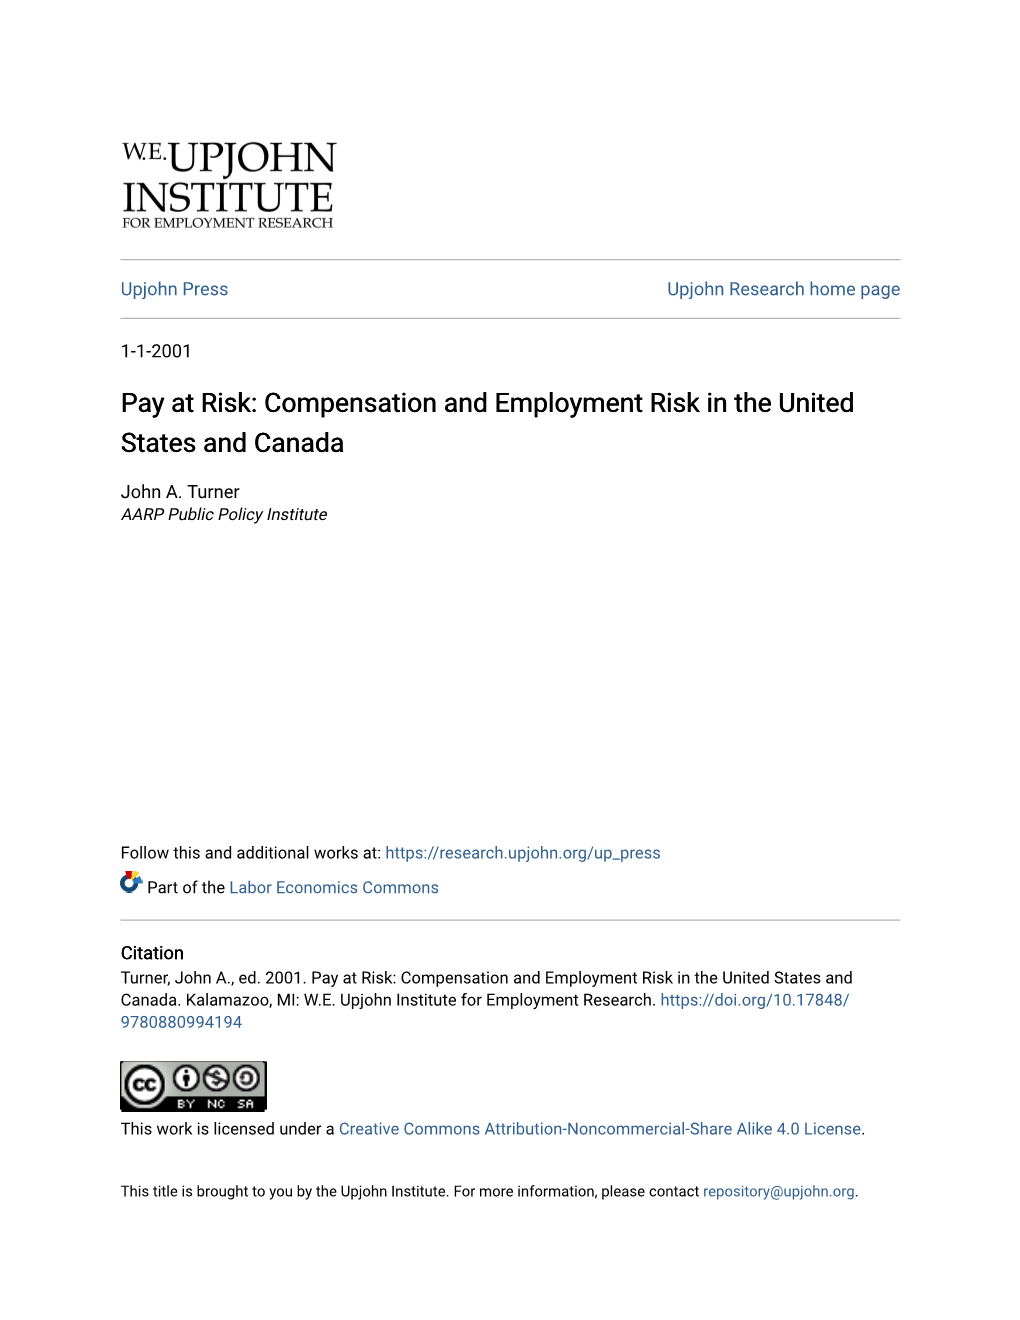 Pay at Risk: Compensation and Employment Risk in the United States and Canada